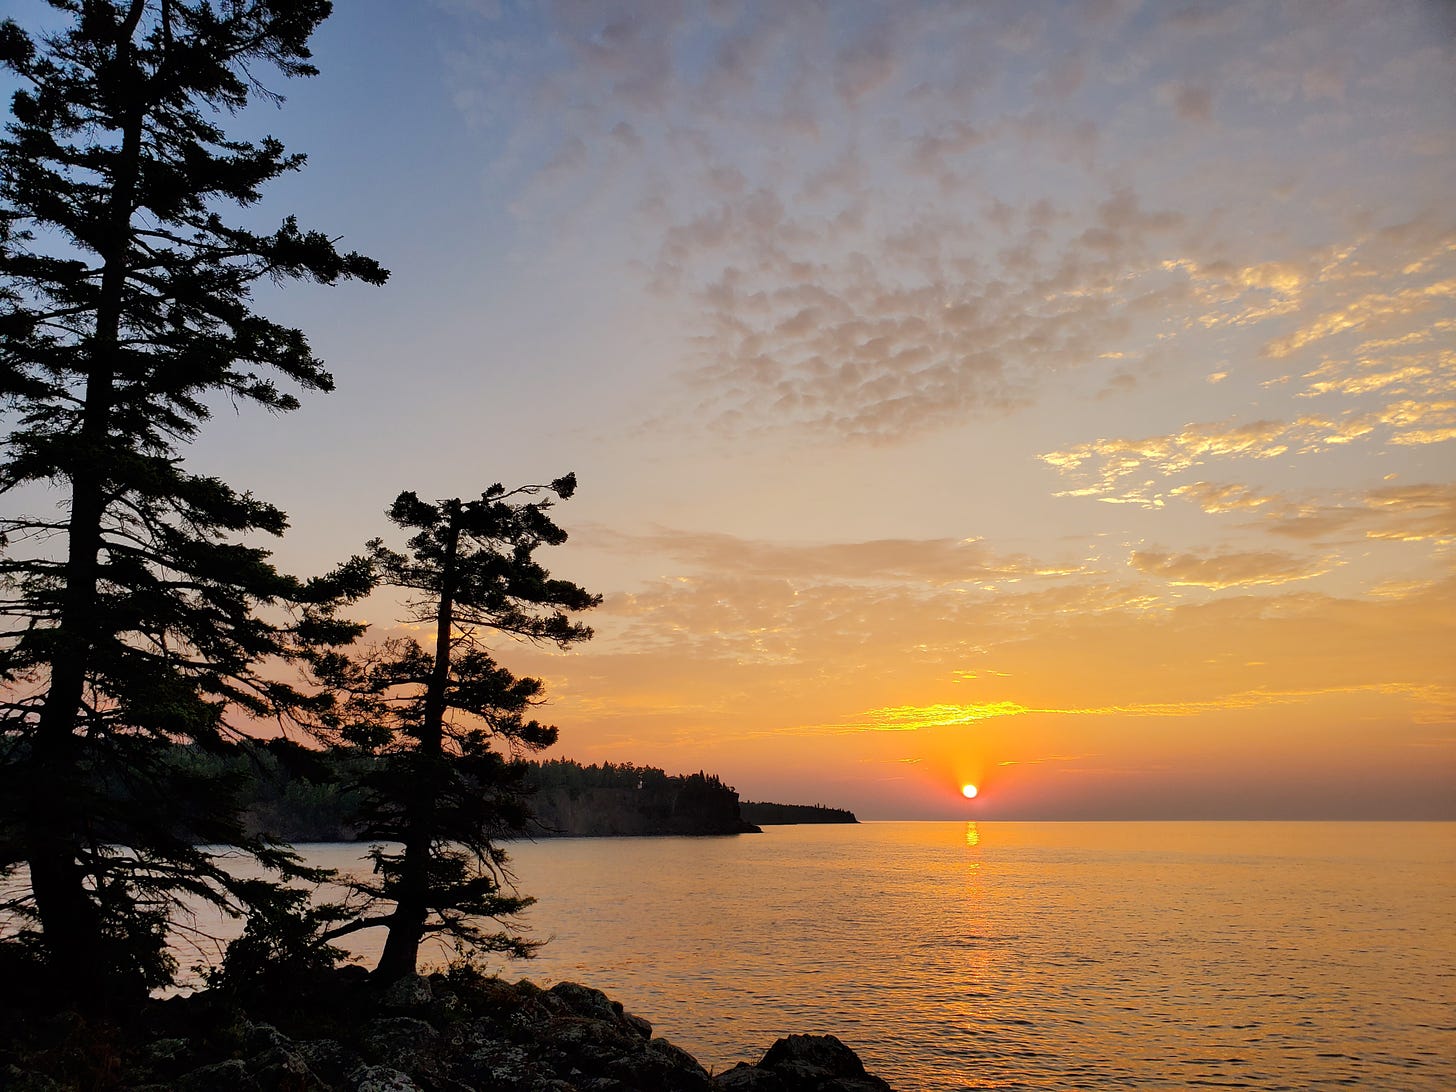 Pine trees in the foreground overlook still waters in a large bay. At the horizon, the newly risen sun peeks through a line of purplish haze. The sky overhead is streaked with wispy white clouds and is blue and gold.